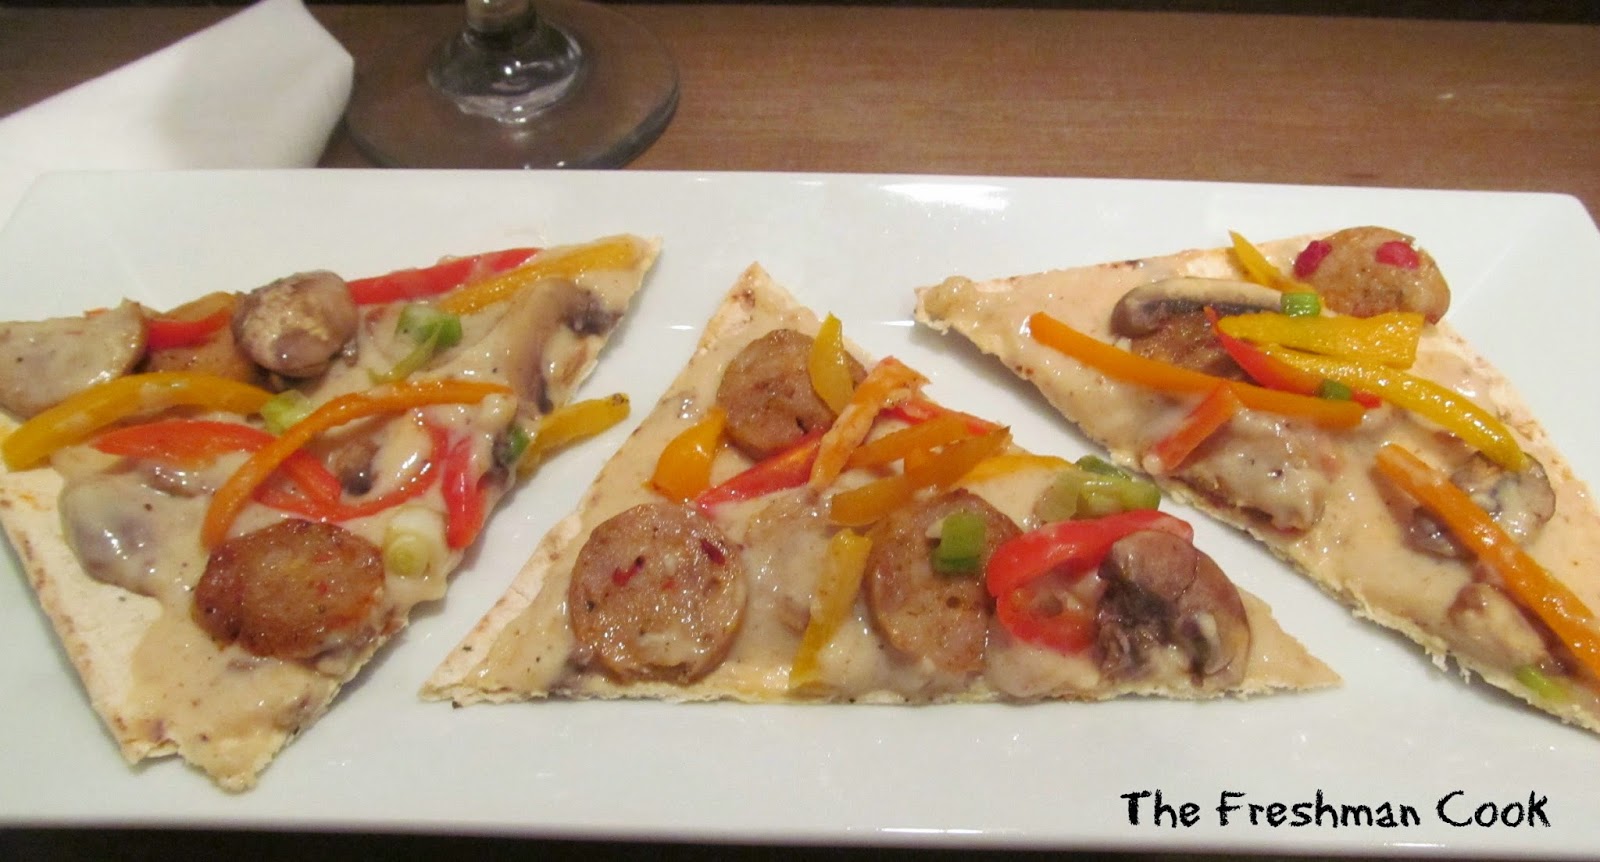 Flatbread appetizer with sausage and mushroom